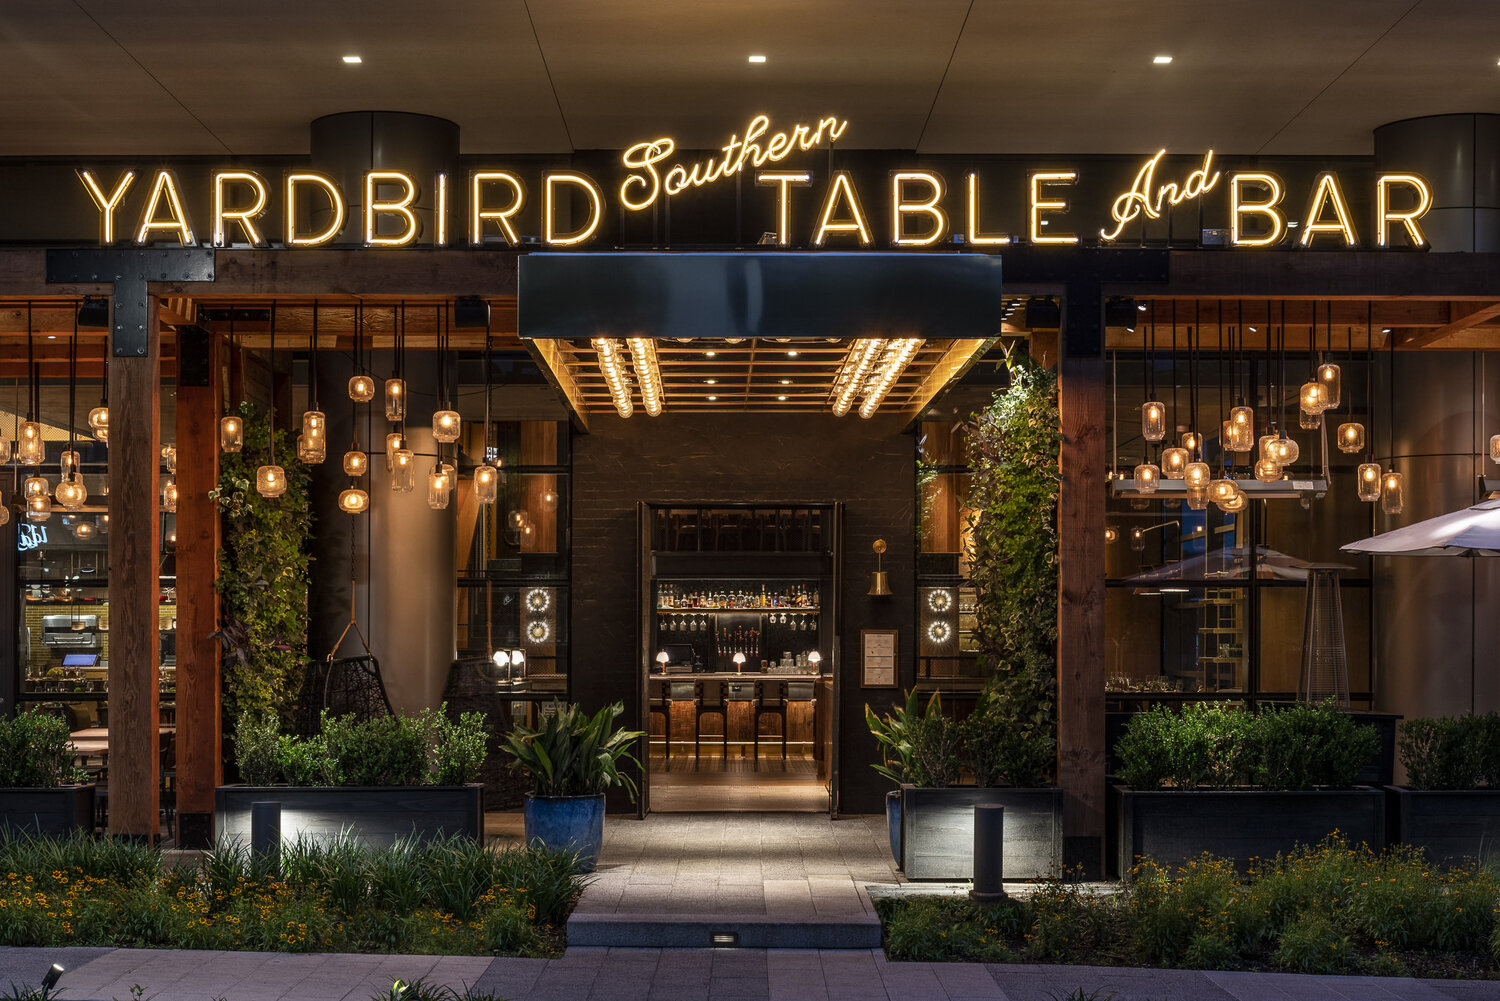 Yardbird Southern Table and Bar in Dallas Texas Designed by Rockwell Group Photographed by Michael Stavaridis — MICHAEL STAVARIDIS photographer